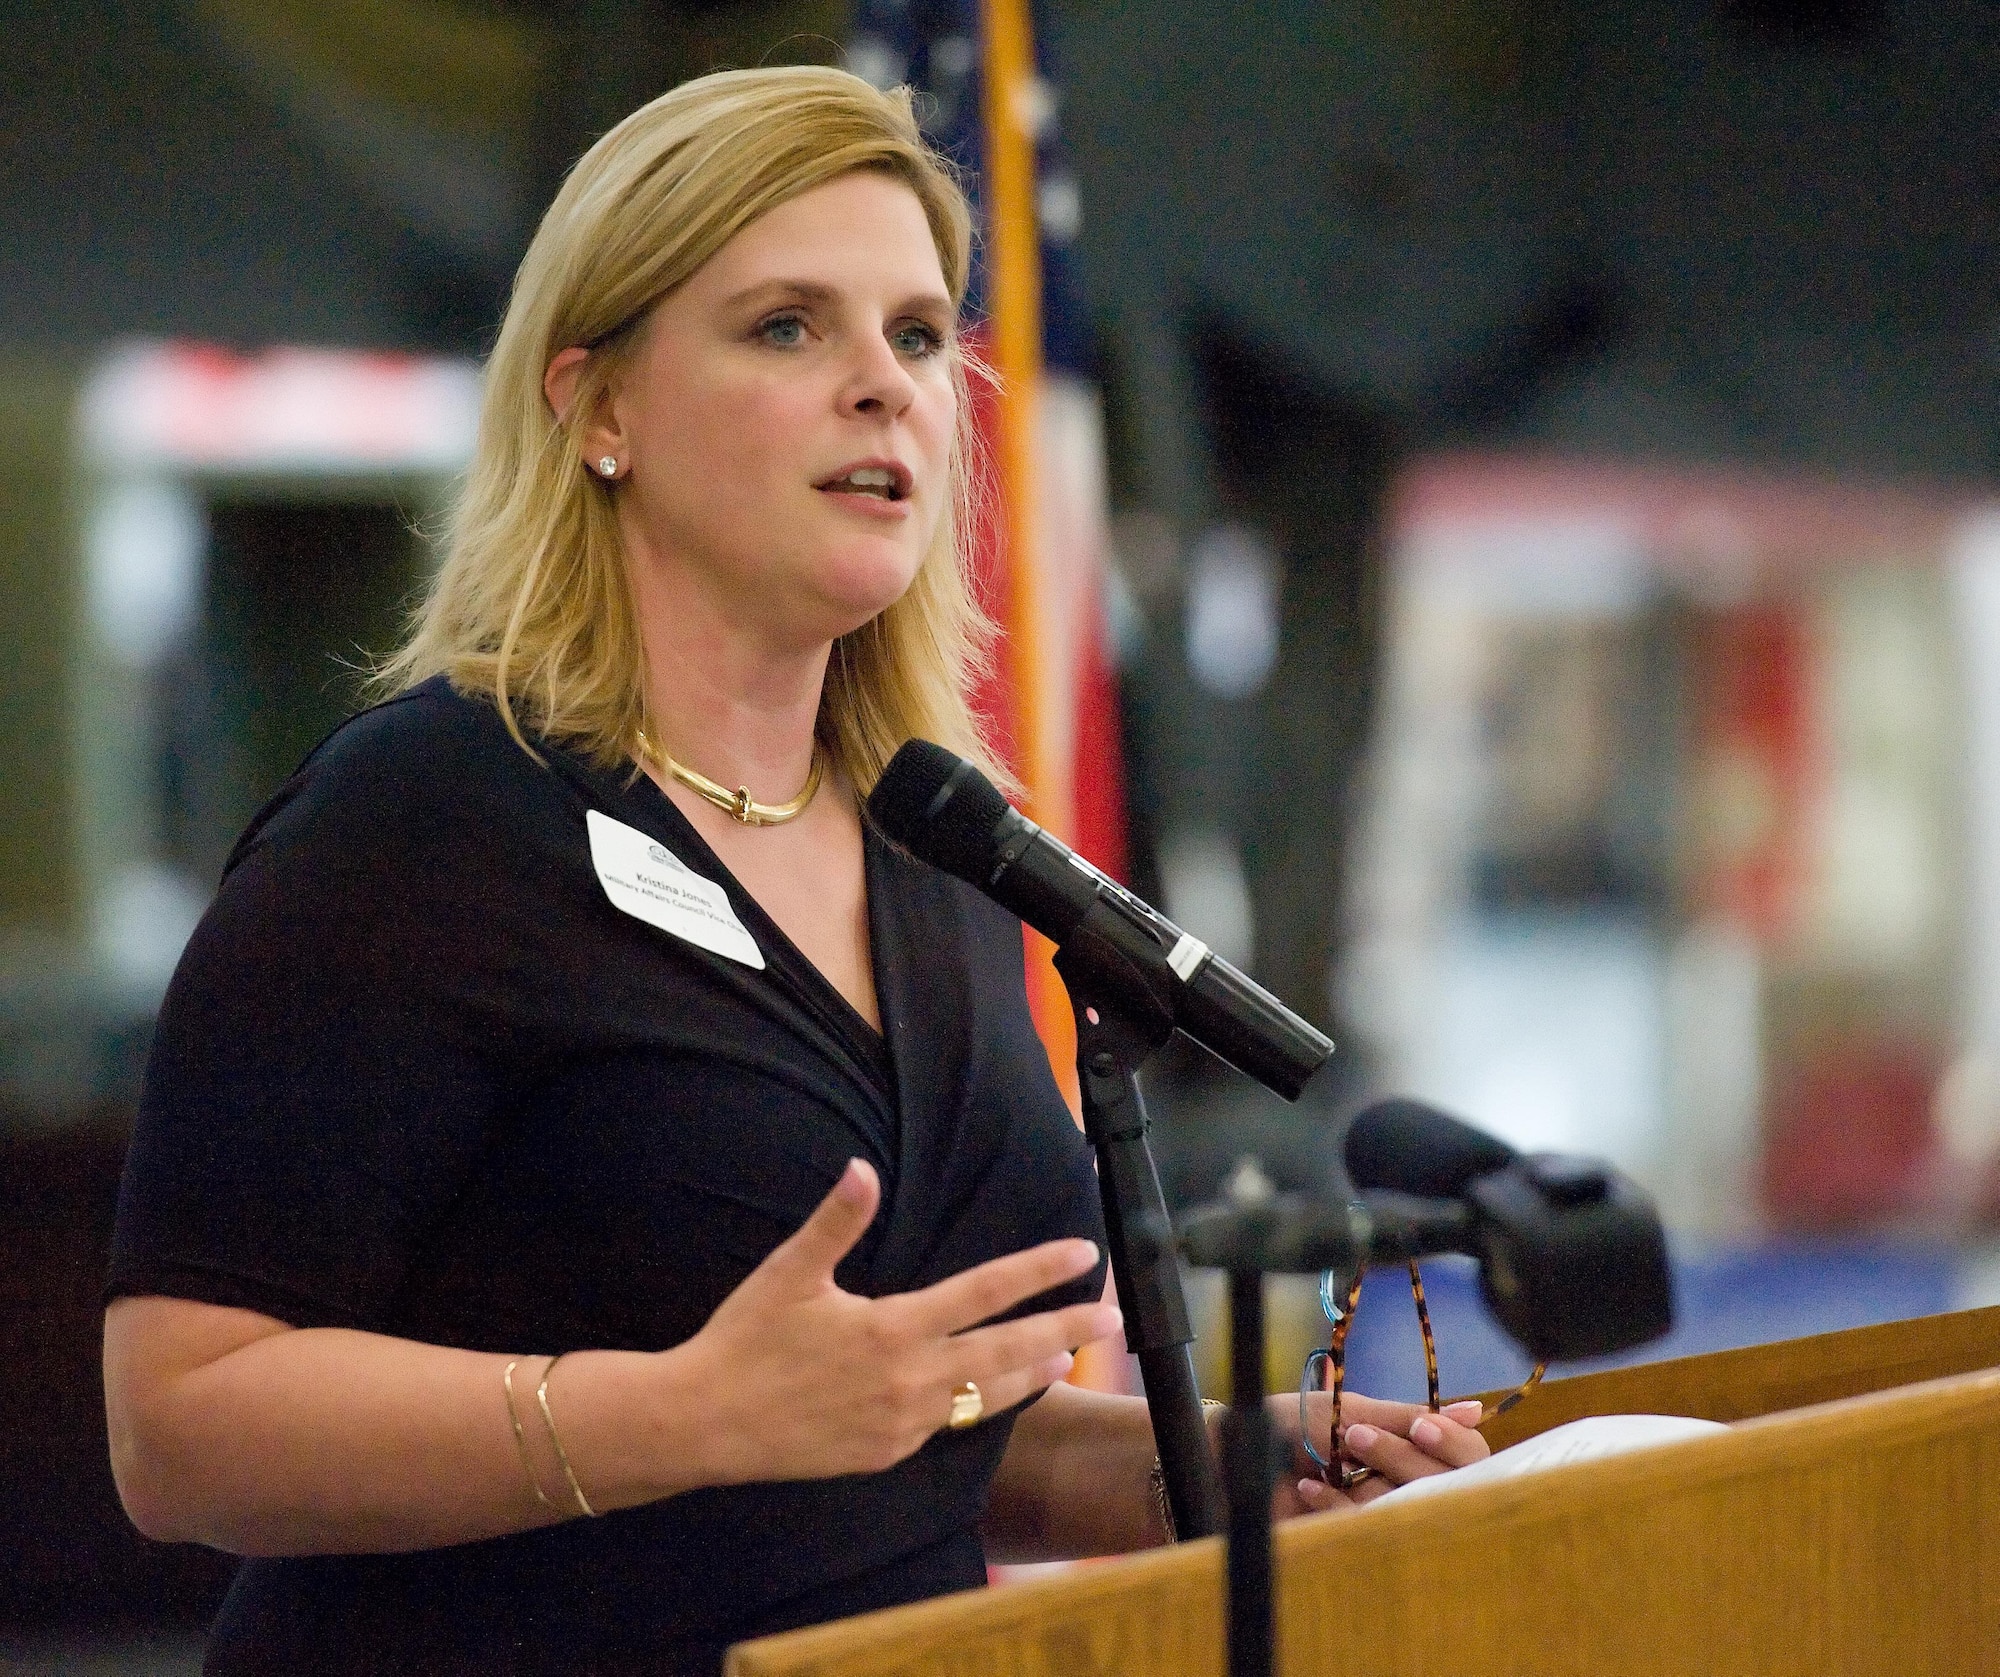 Kristina Jones, Abilene Chamber of Commerce vice-chair of the Military Affairs Committee, addresses attendees during the 2015 Abilene Trophy presentation ceremony July 13, 2016, at the Air Mobility Command Museum on Dover Air Force Base, Del. Representatives of the 436th and 512th Airlift Wings, Air Force Mortuary Affairs Operations, Abilene Chamber of Commerce, Central Delaware Chamber of Commerce, Dover AFB honorary commanders, civic leaders and congressional delegate representatives attended the trophy presentation. (U.S. Air Force photo/Roland Balik)